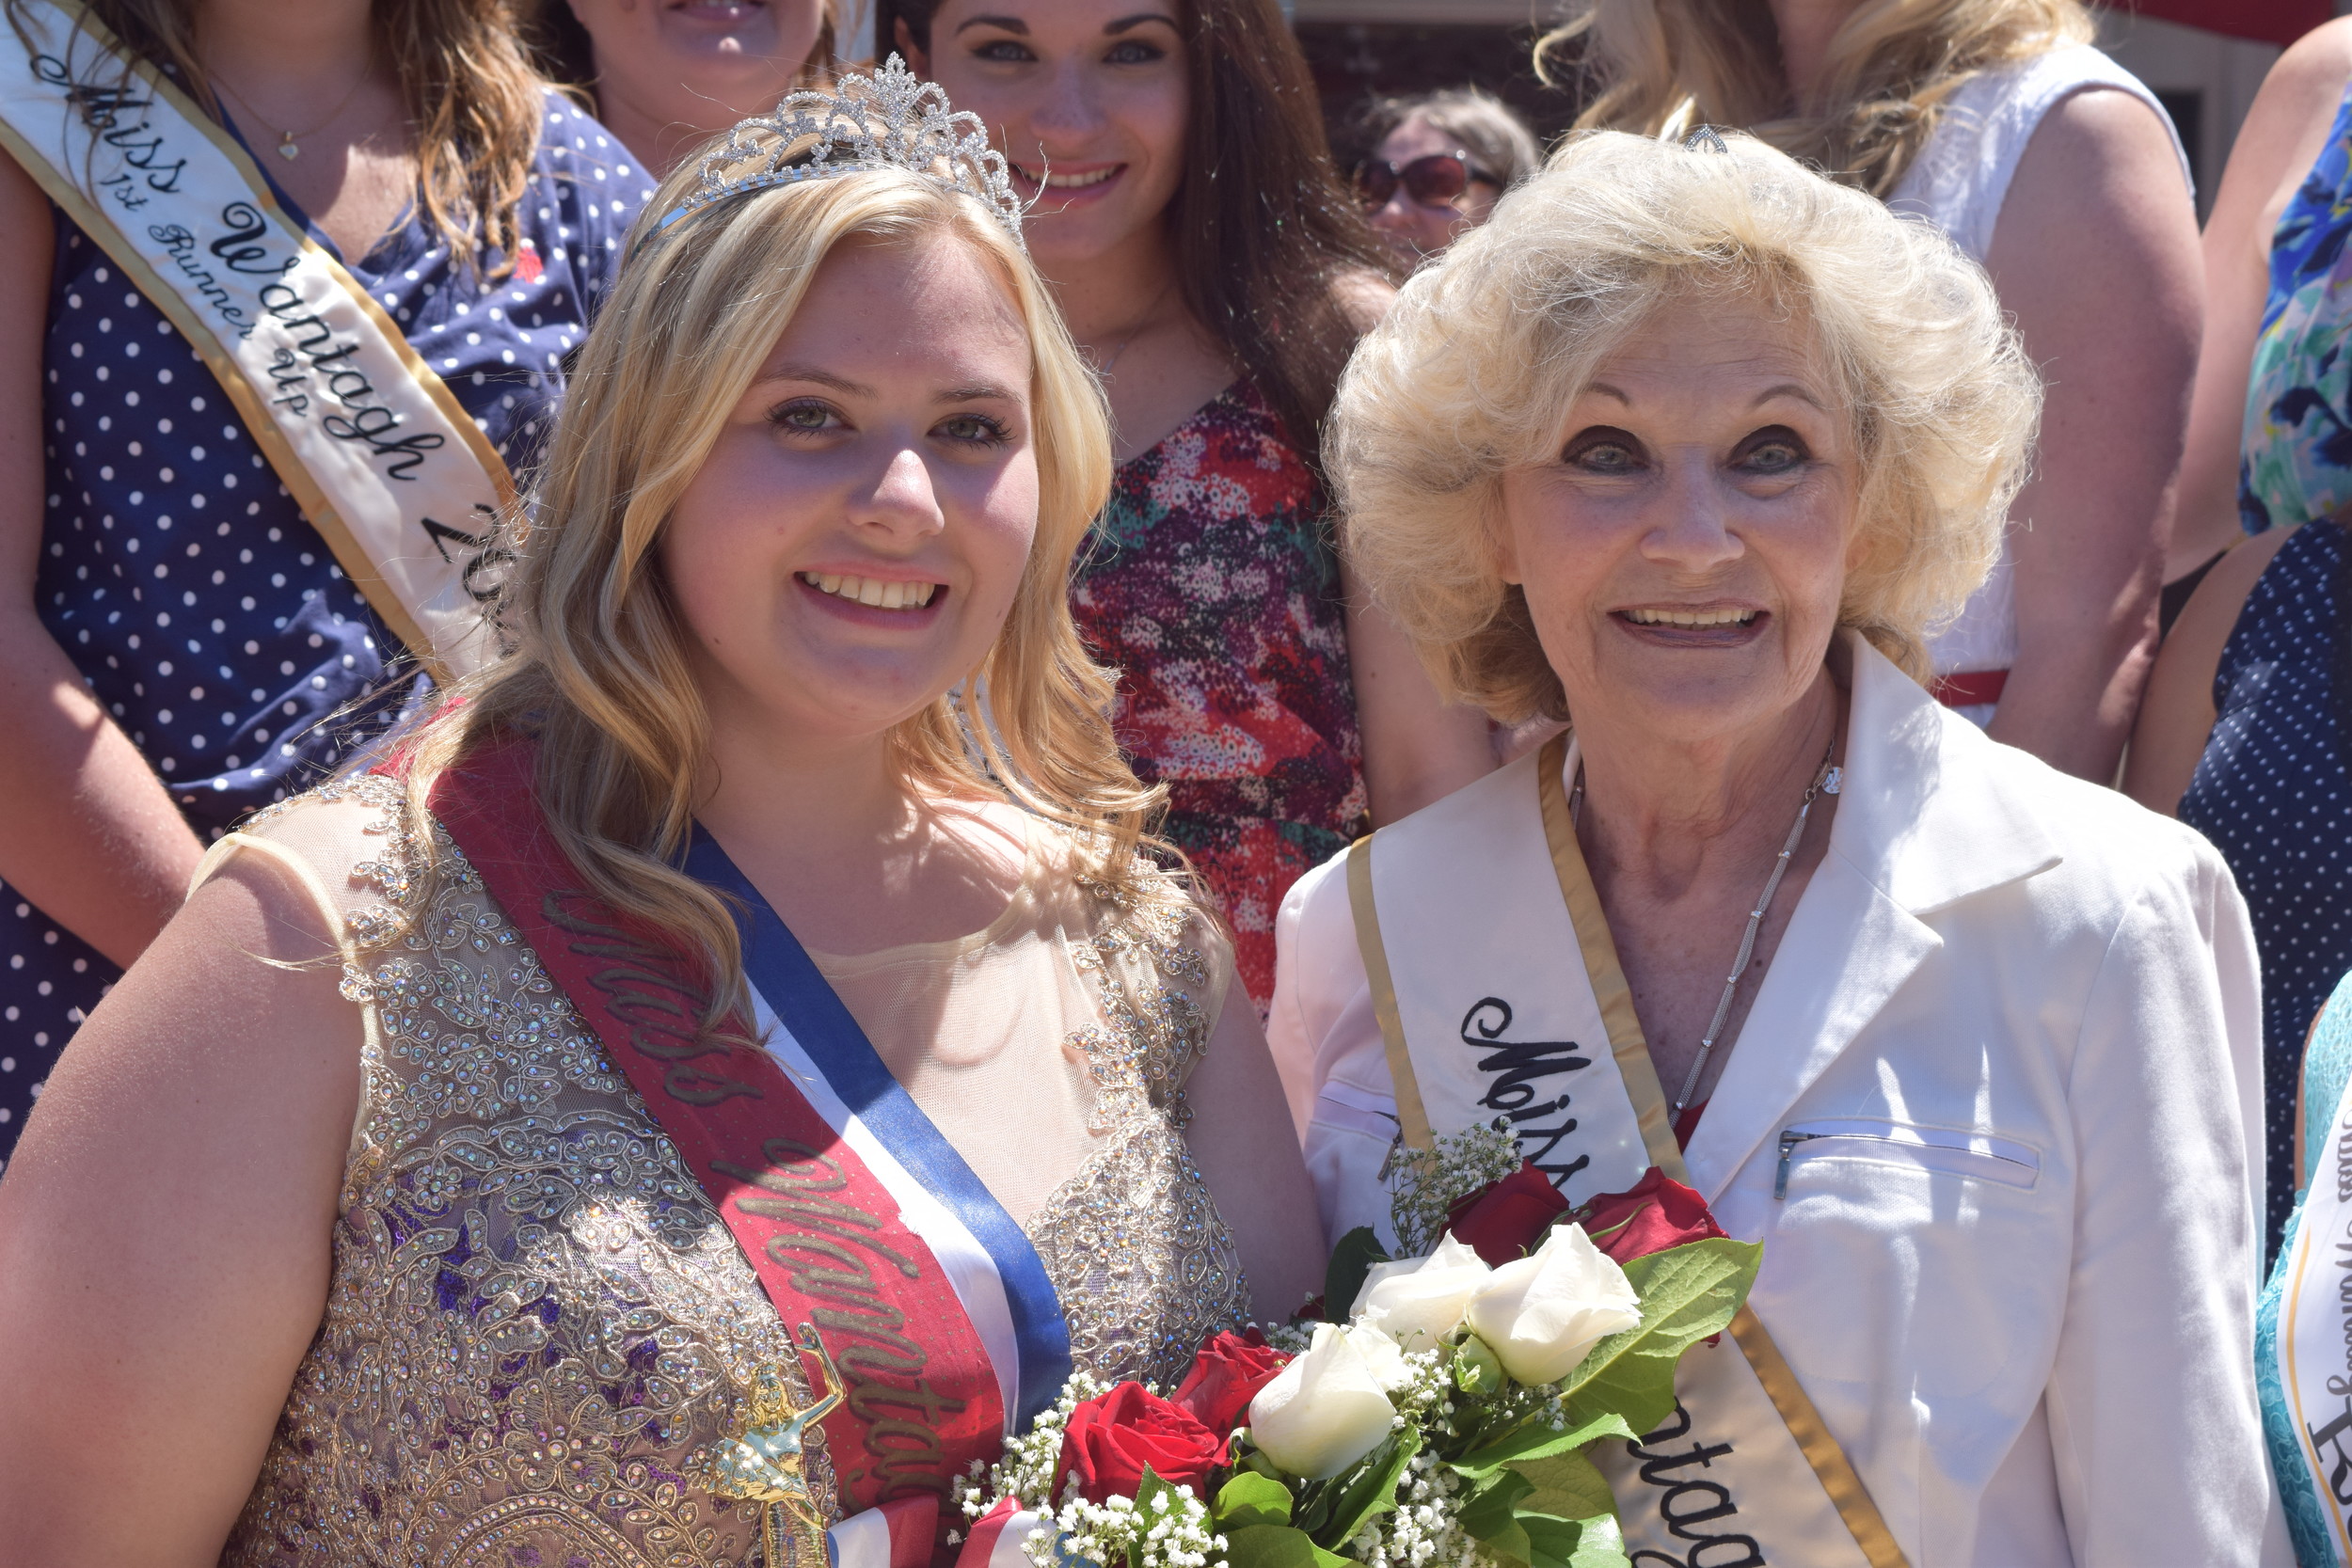 The 2016 Miss Wantagh Emma Carey stood with Lynn Clayton, the first-ever Miss Wantagh, crowned in 1956.